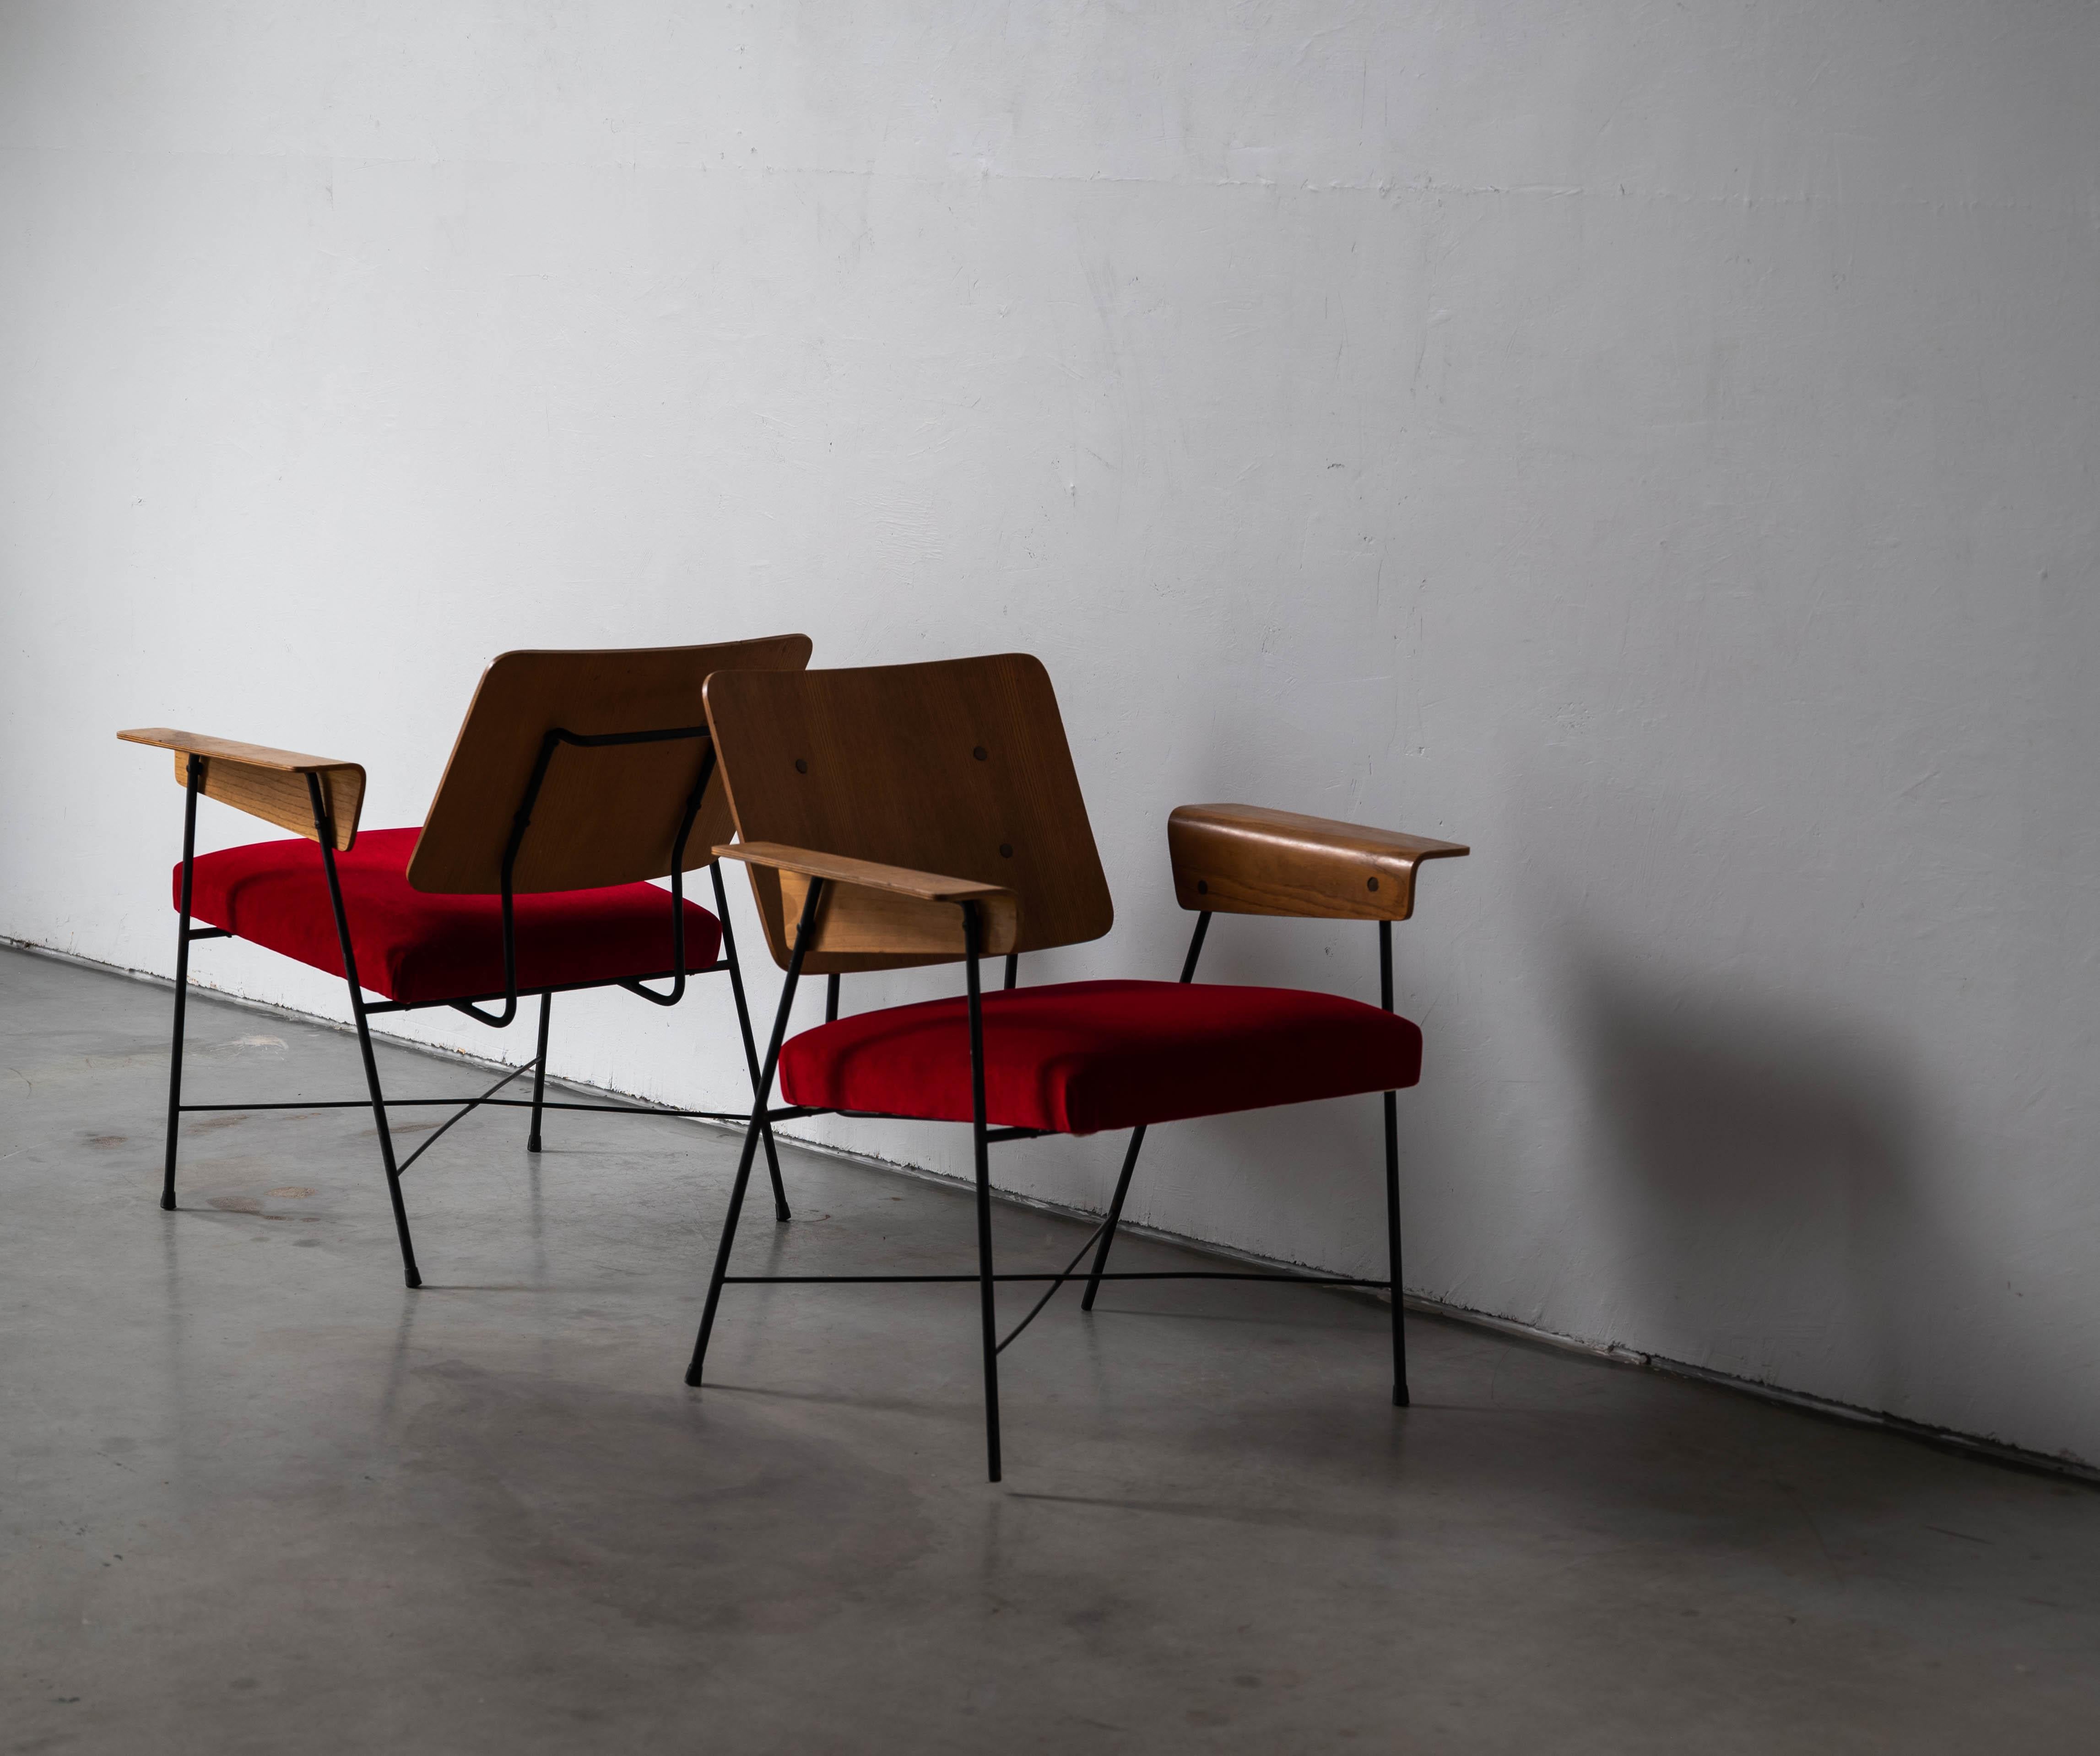 George Coslin, Lounge Chairs, Metal, Red Fabric, Plywood, Italy, 1960s 1